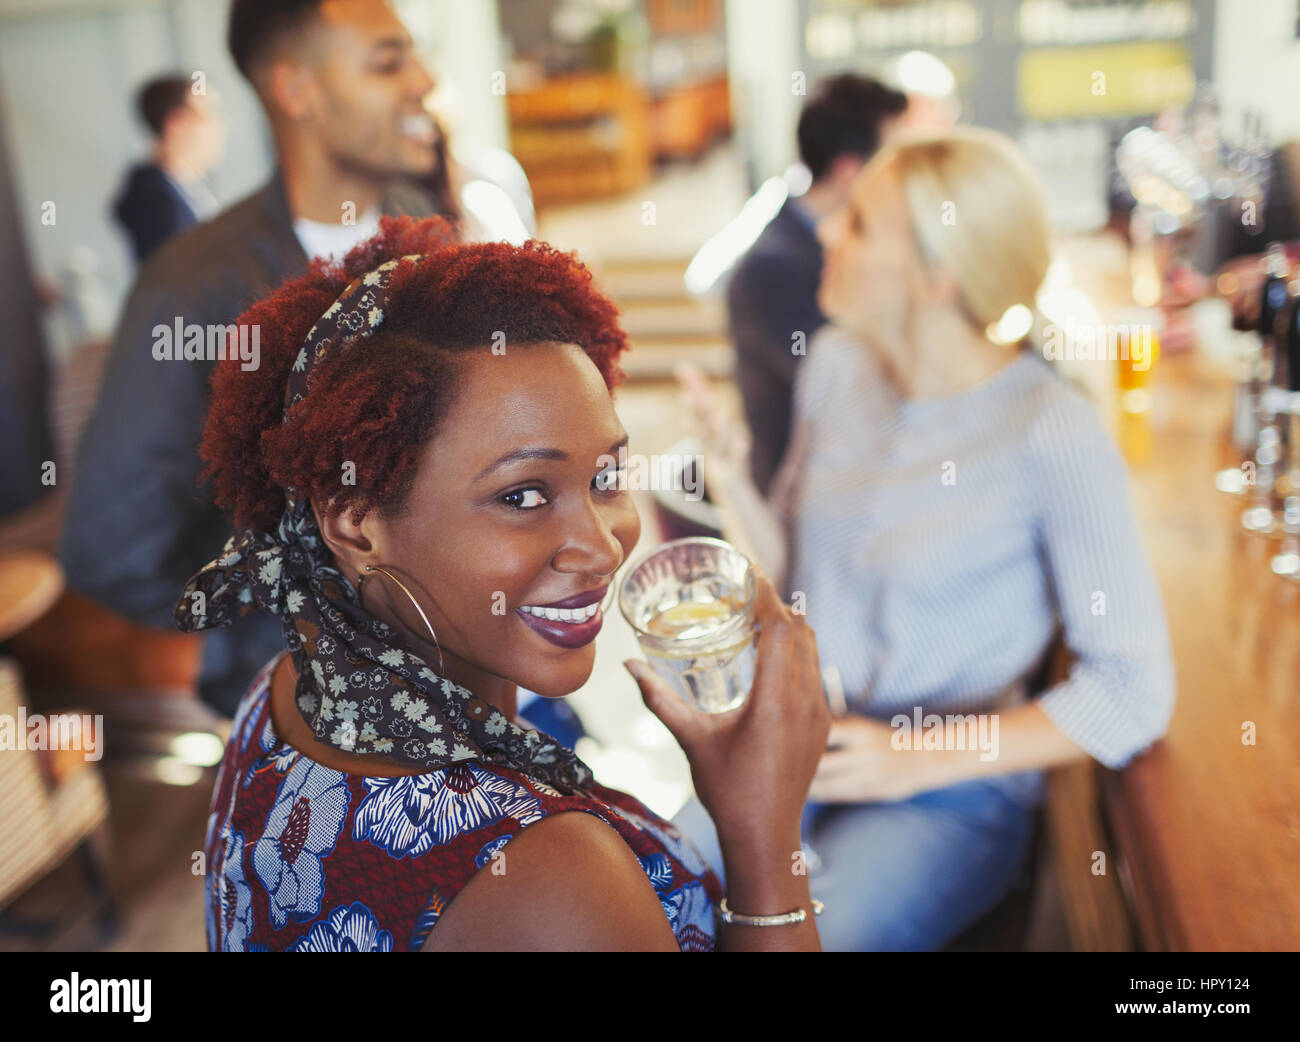 Portrait smiling woman drinking water and talking with friends at bar Stock Photo